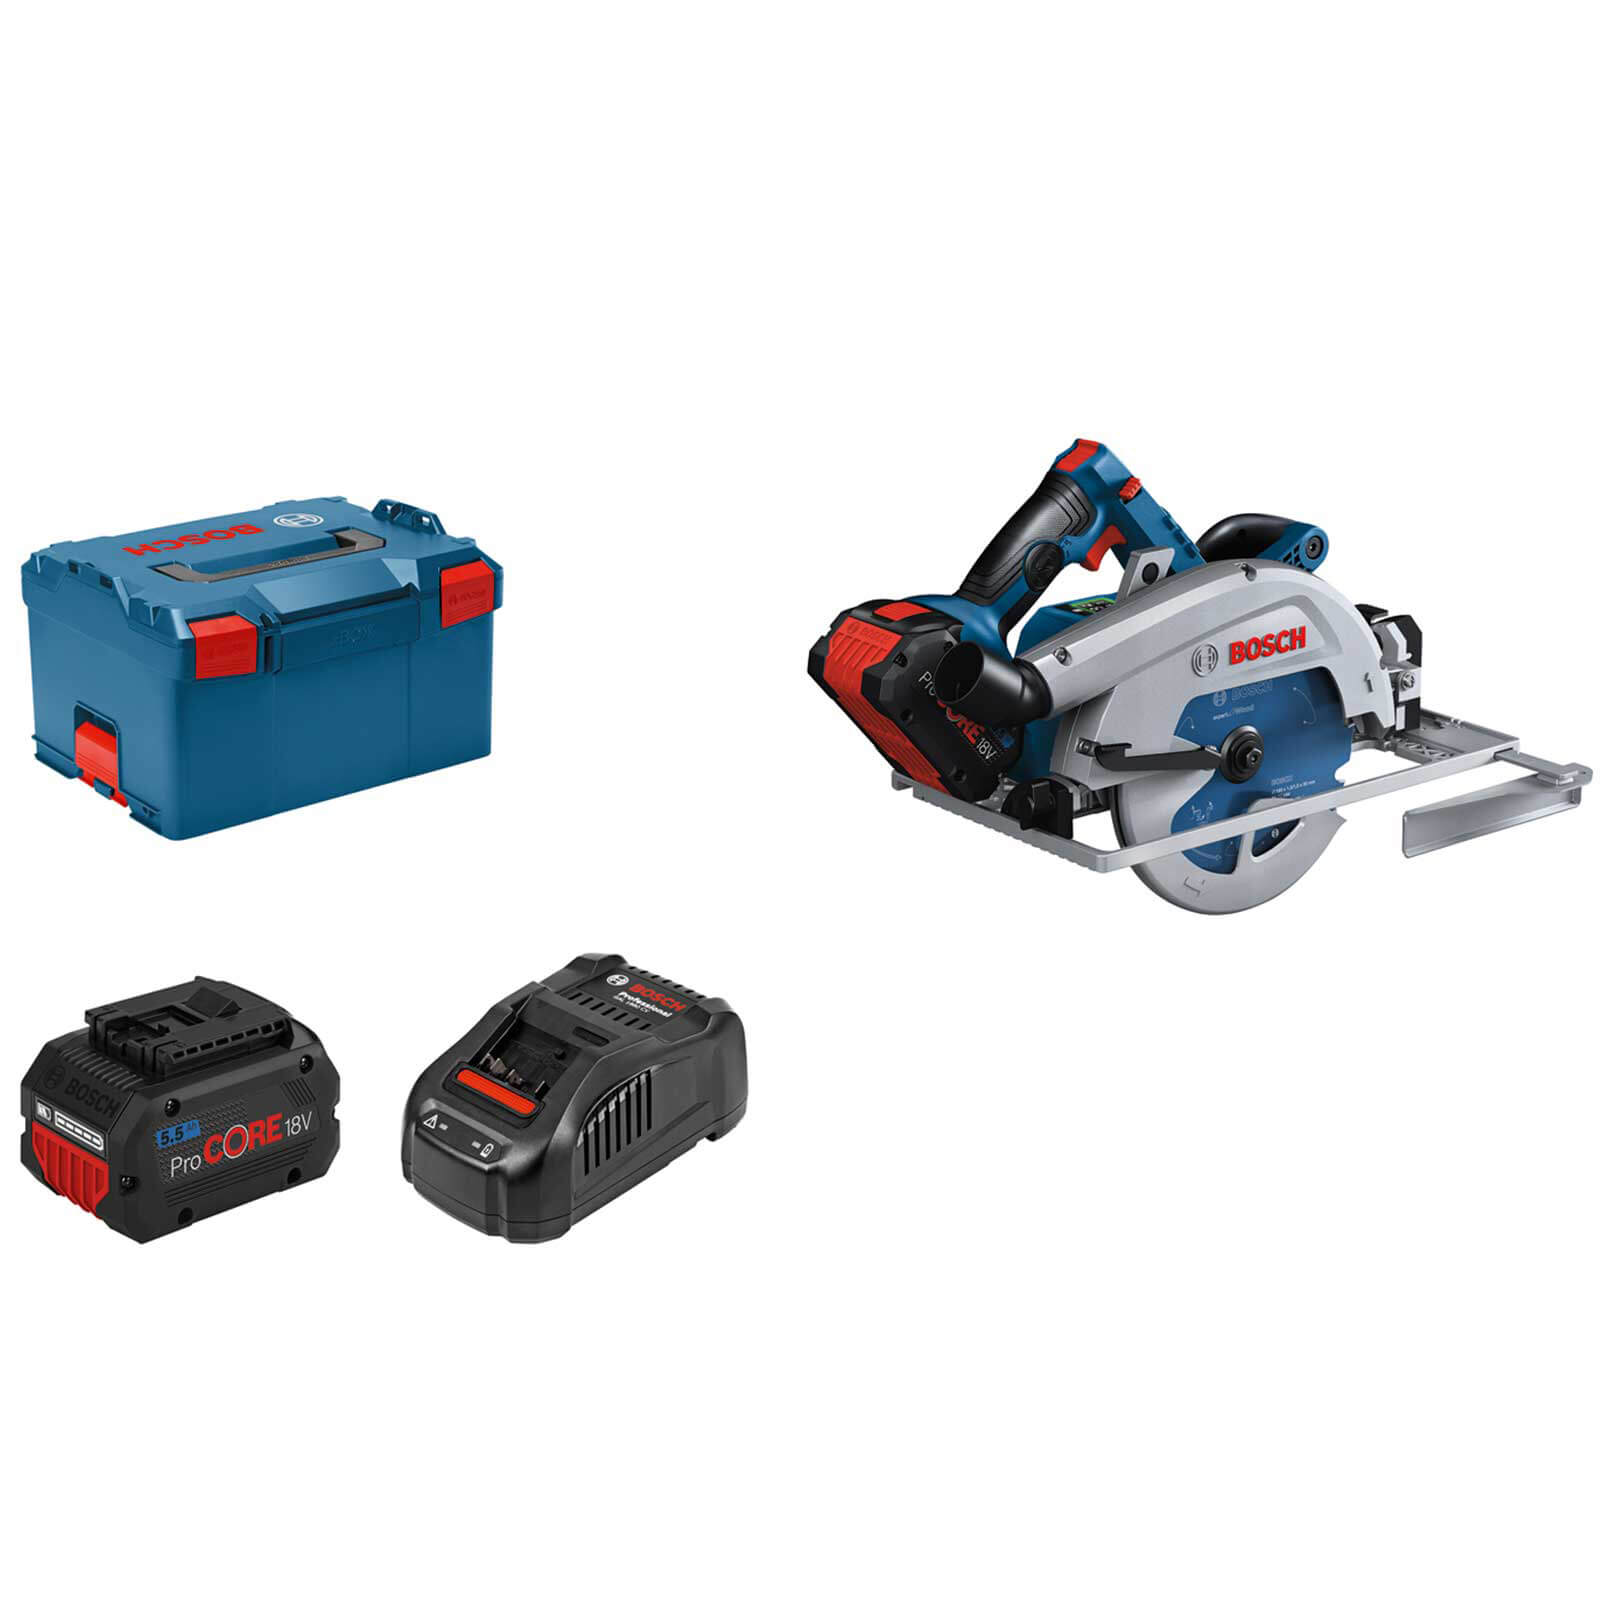 Image of Bosch GKS 18V-68 GC BITURBO 18v Brushless Guide Rail Compatible Connected Circular Saw 190mm 2 x 5.5ah Li-ion ProCore Charger Case